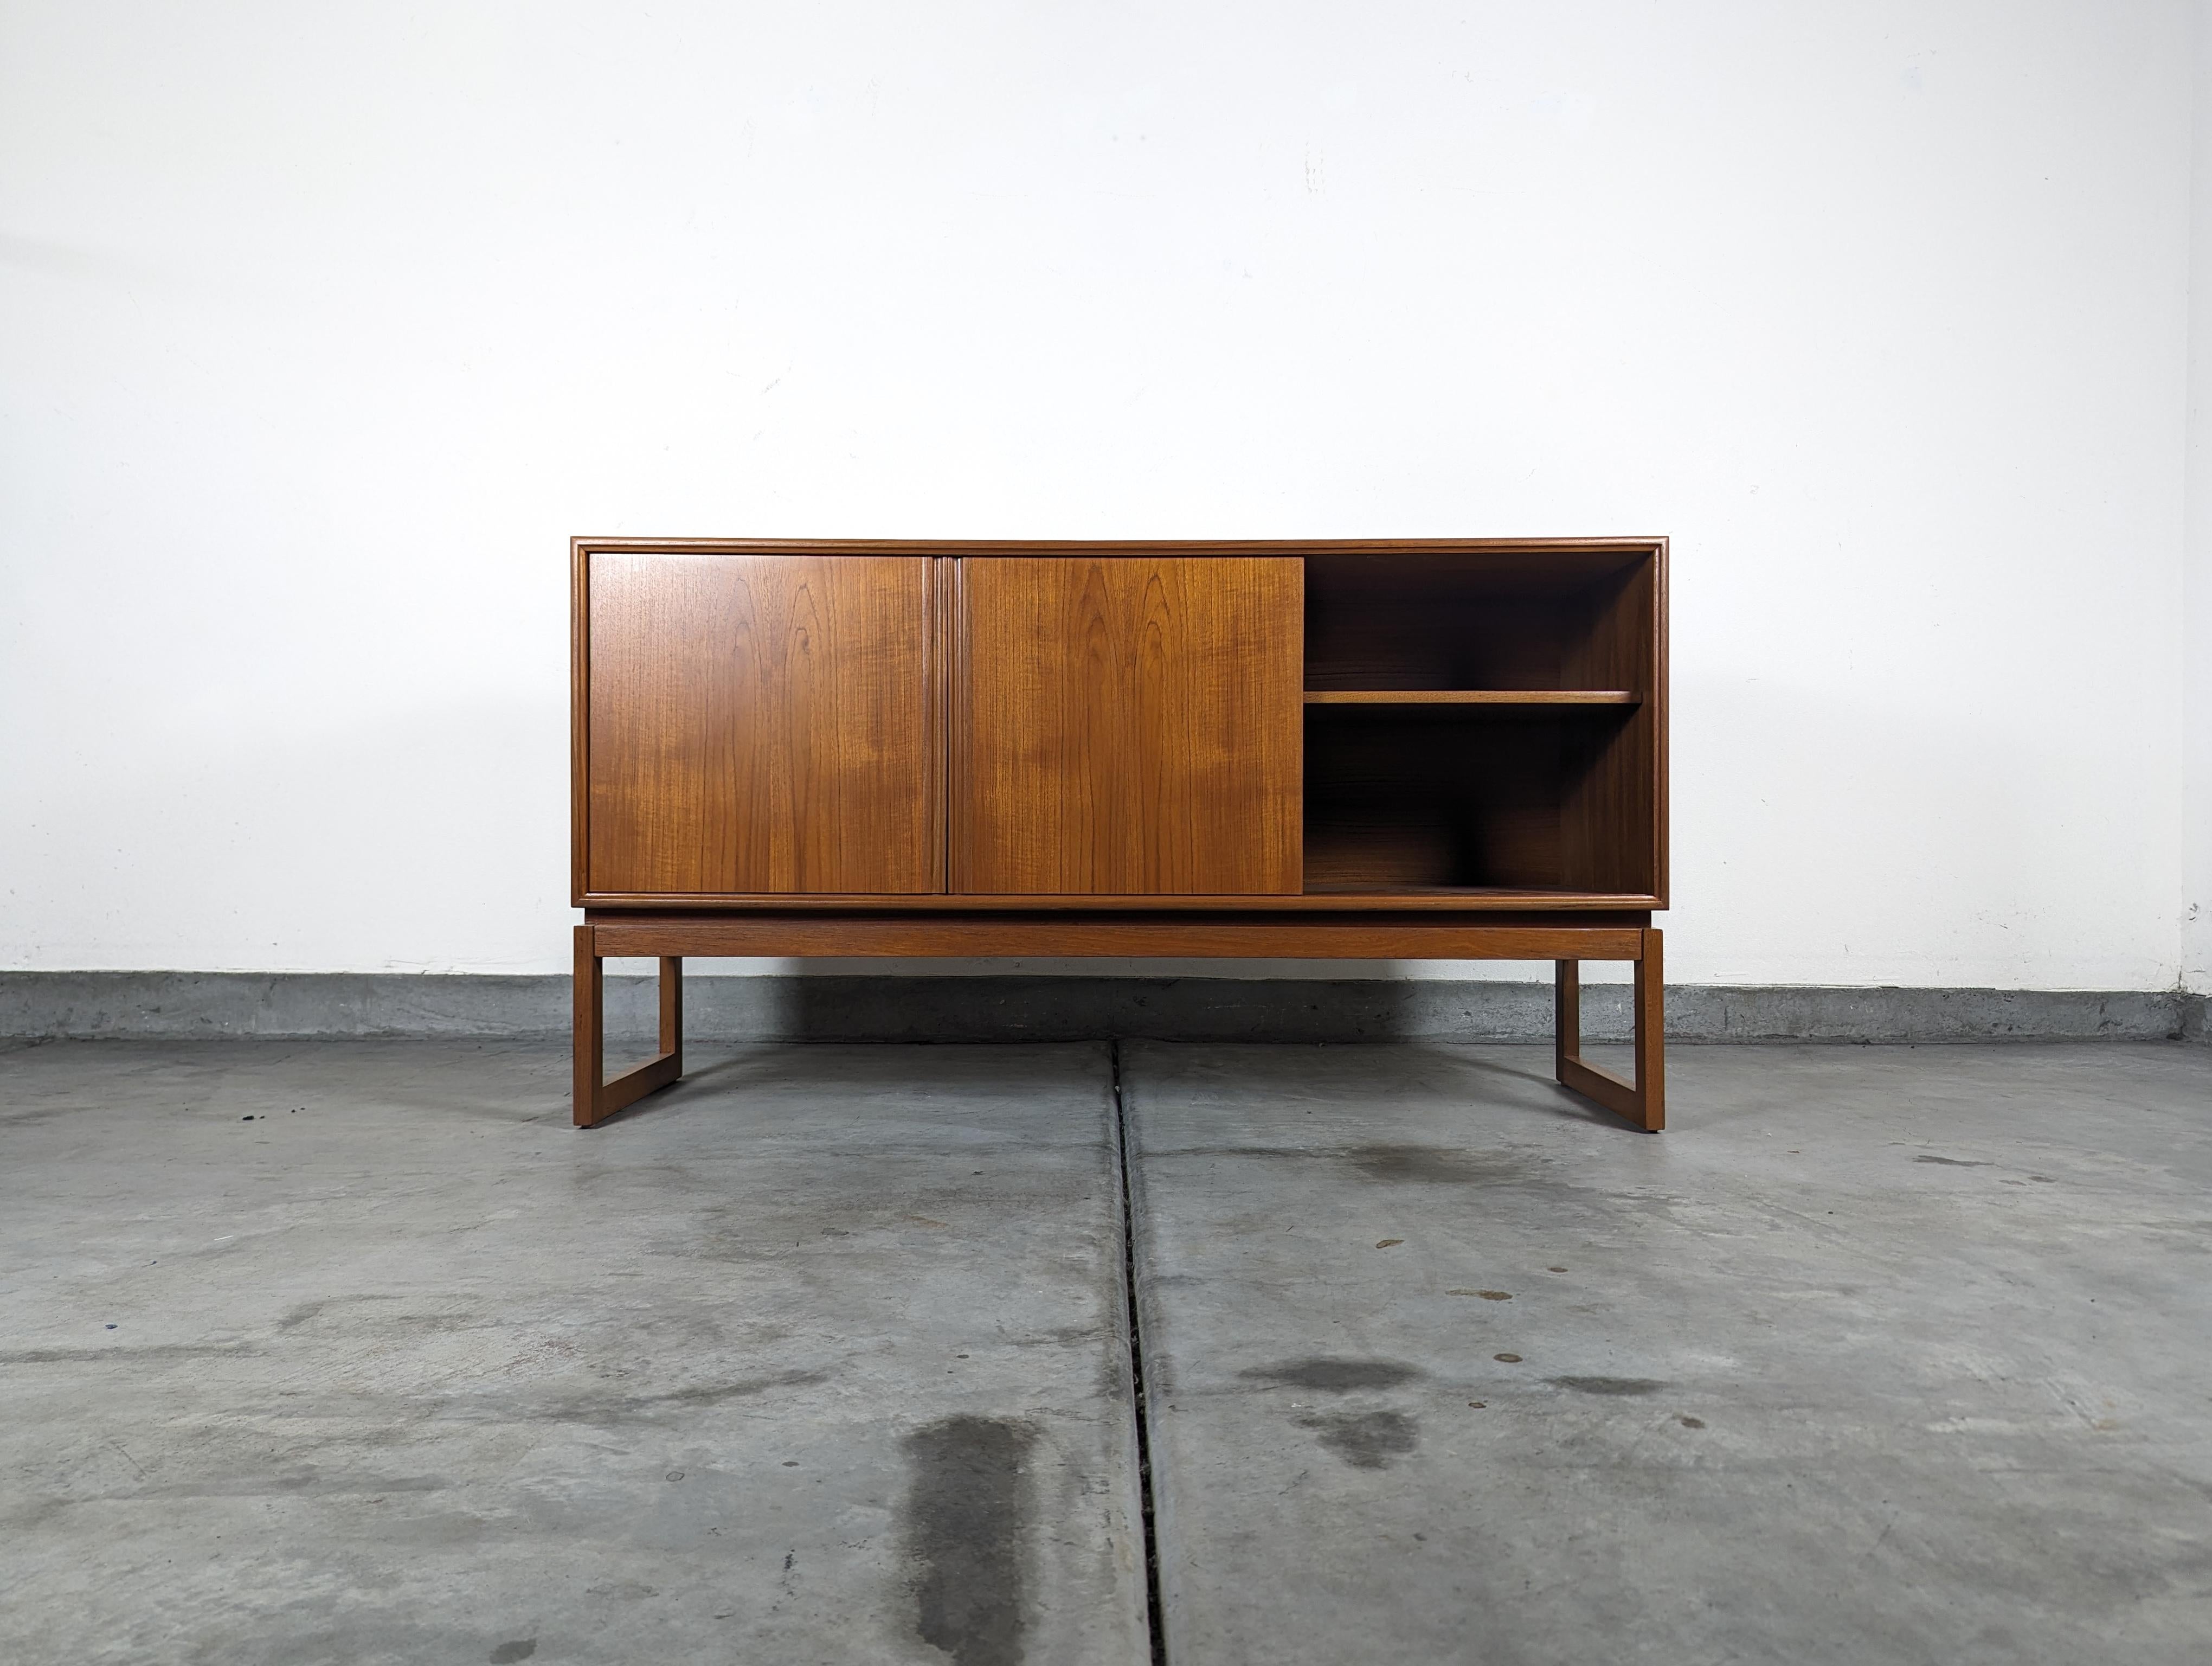 Step back in time and embrace the understated elegance of mid-century design with this exquisite vintage credenza, crafted by the renowned designer Axel Christiansen for ACO Møbler in the swinging 1960s. This timeless piece, measuring approximately